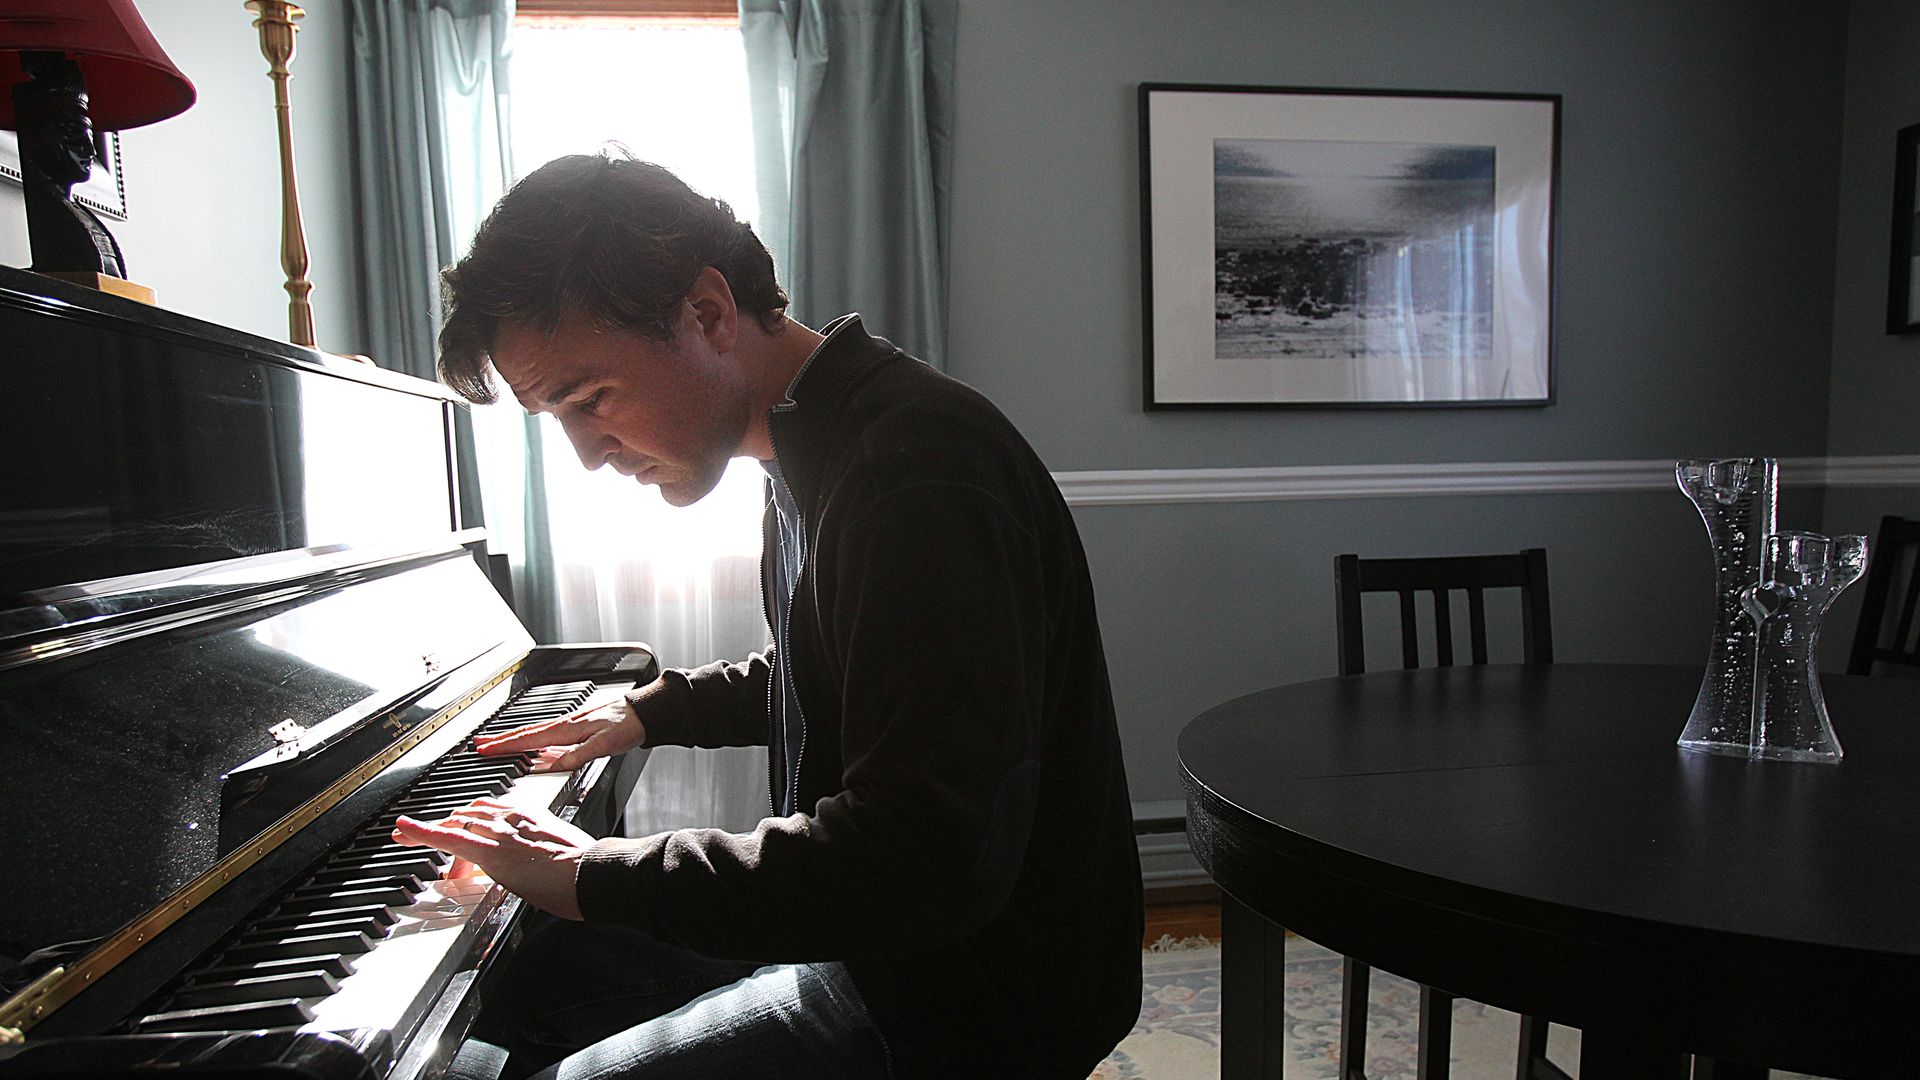 Matt Farley playing a piano in a dining room.